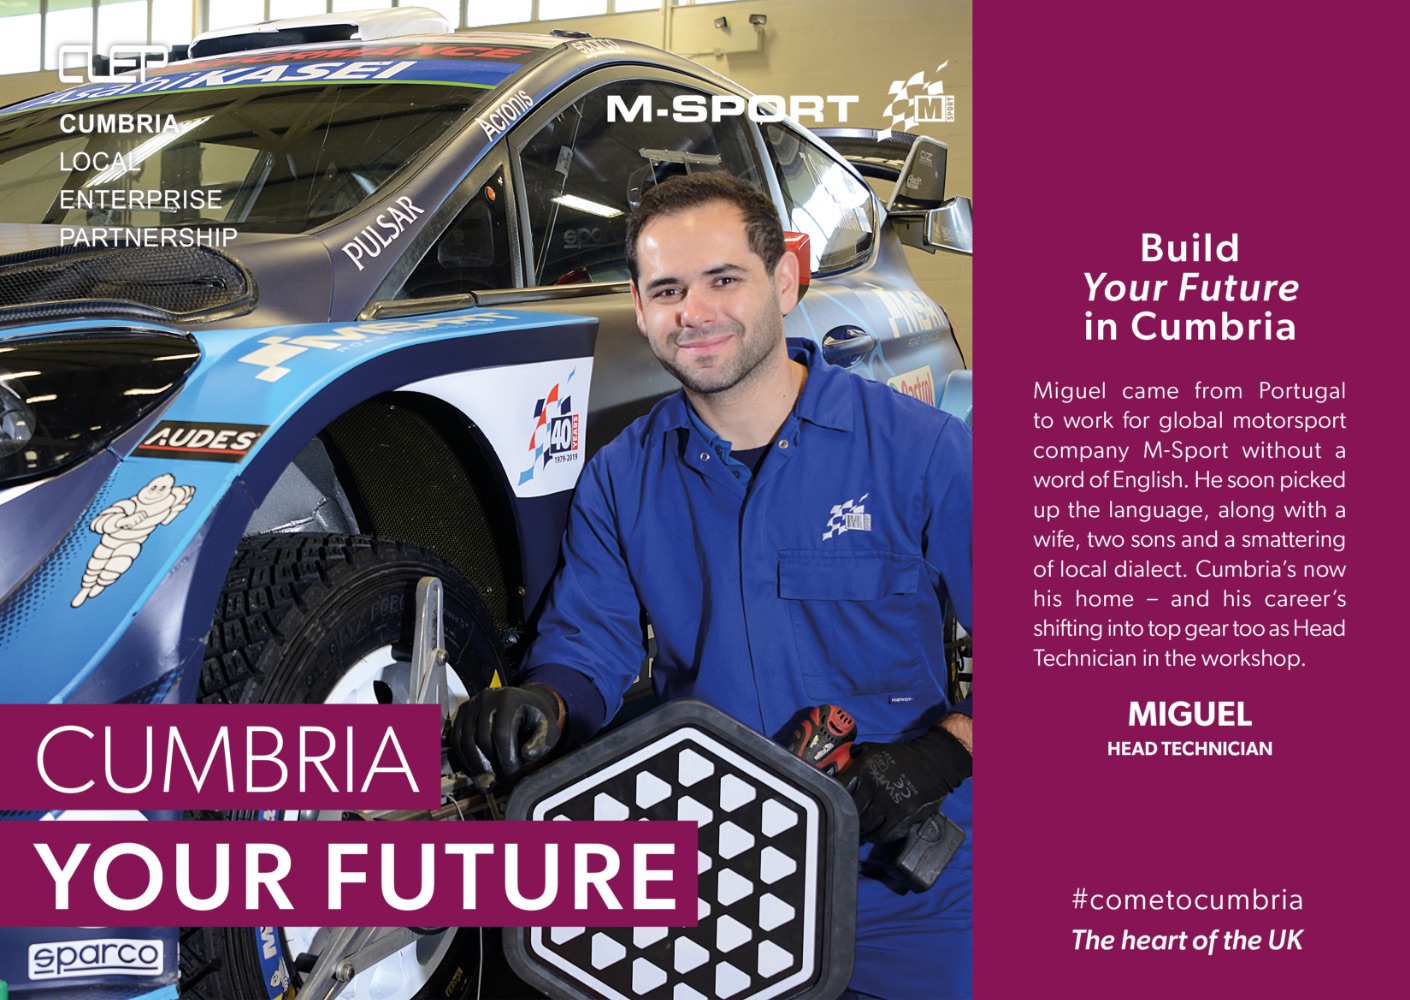 Build Your Future In Cumbria: Miguel came from Portugal to work for global motorsport company M-Sport without a word of English. He soon picked up the language, along with a wife, two sons and a smattering of local dialect. Cumbria's now his home - and his career's shifting into top gear as Head Technician in the workshop. (Photo: Miguel, head technician).